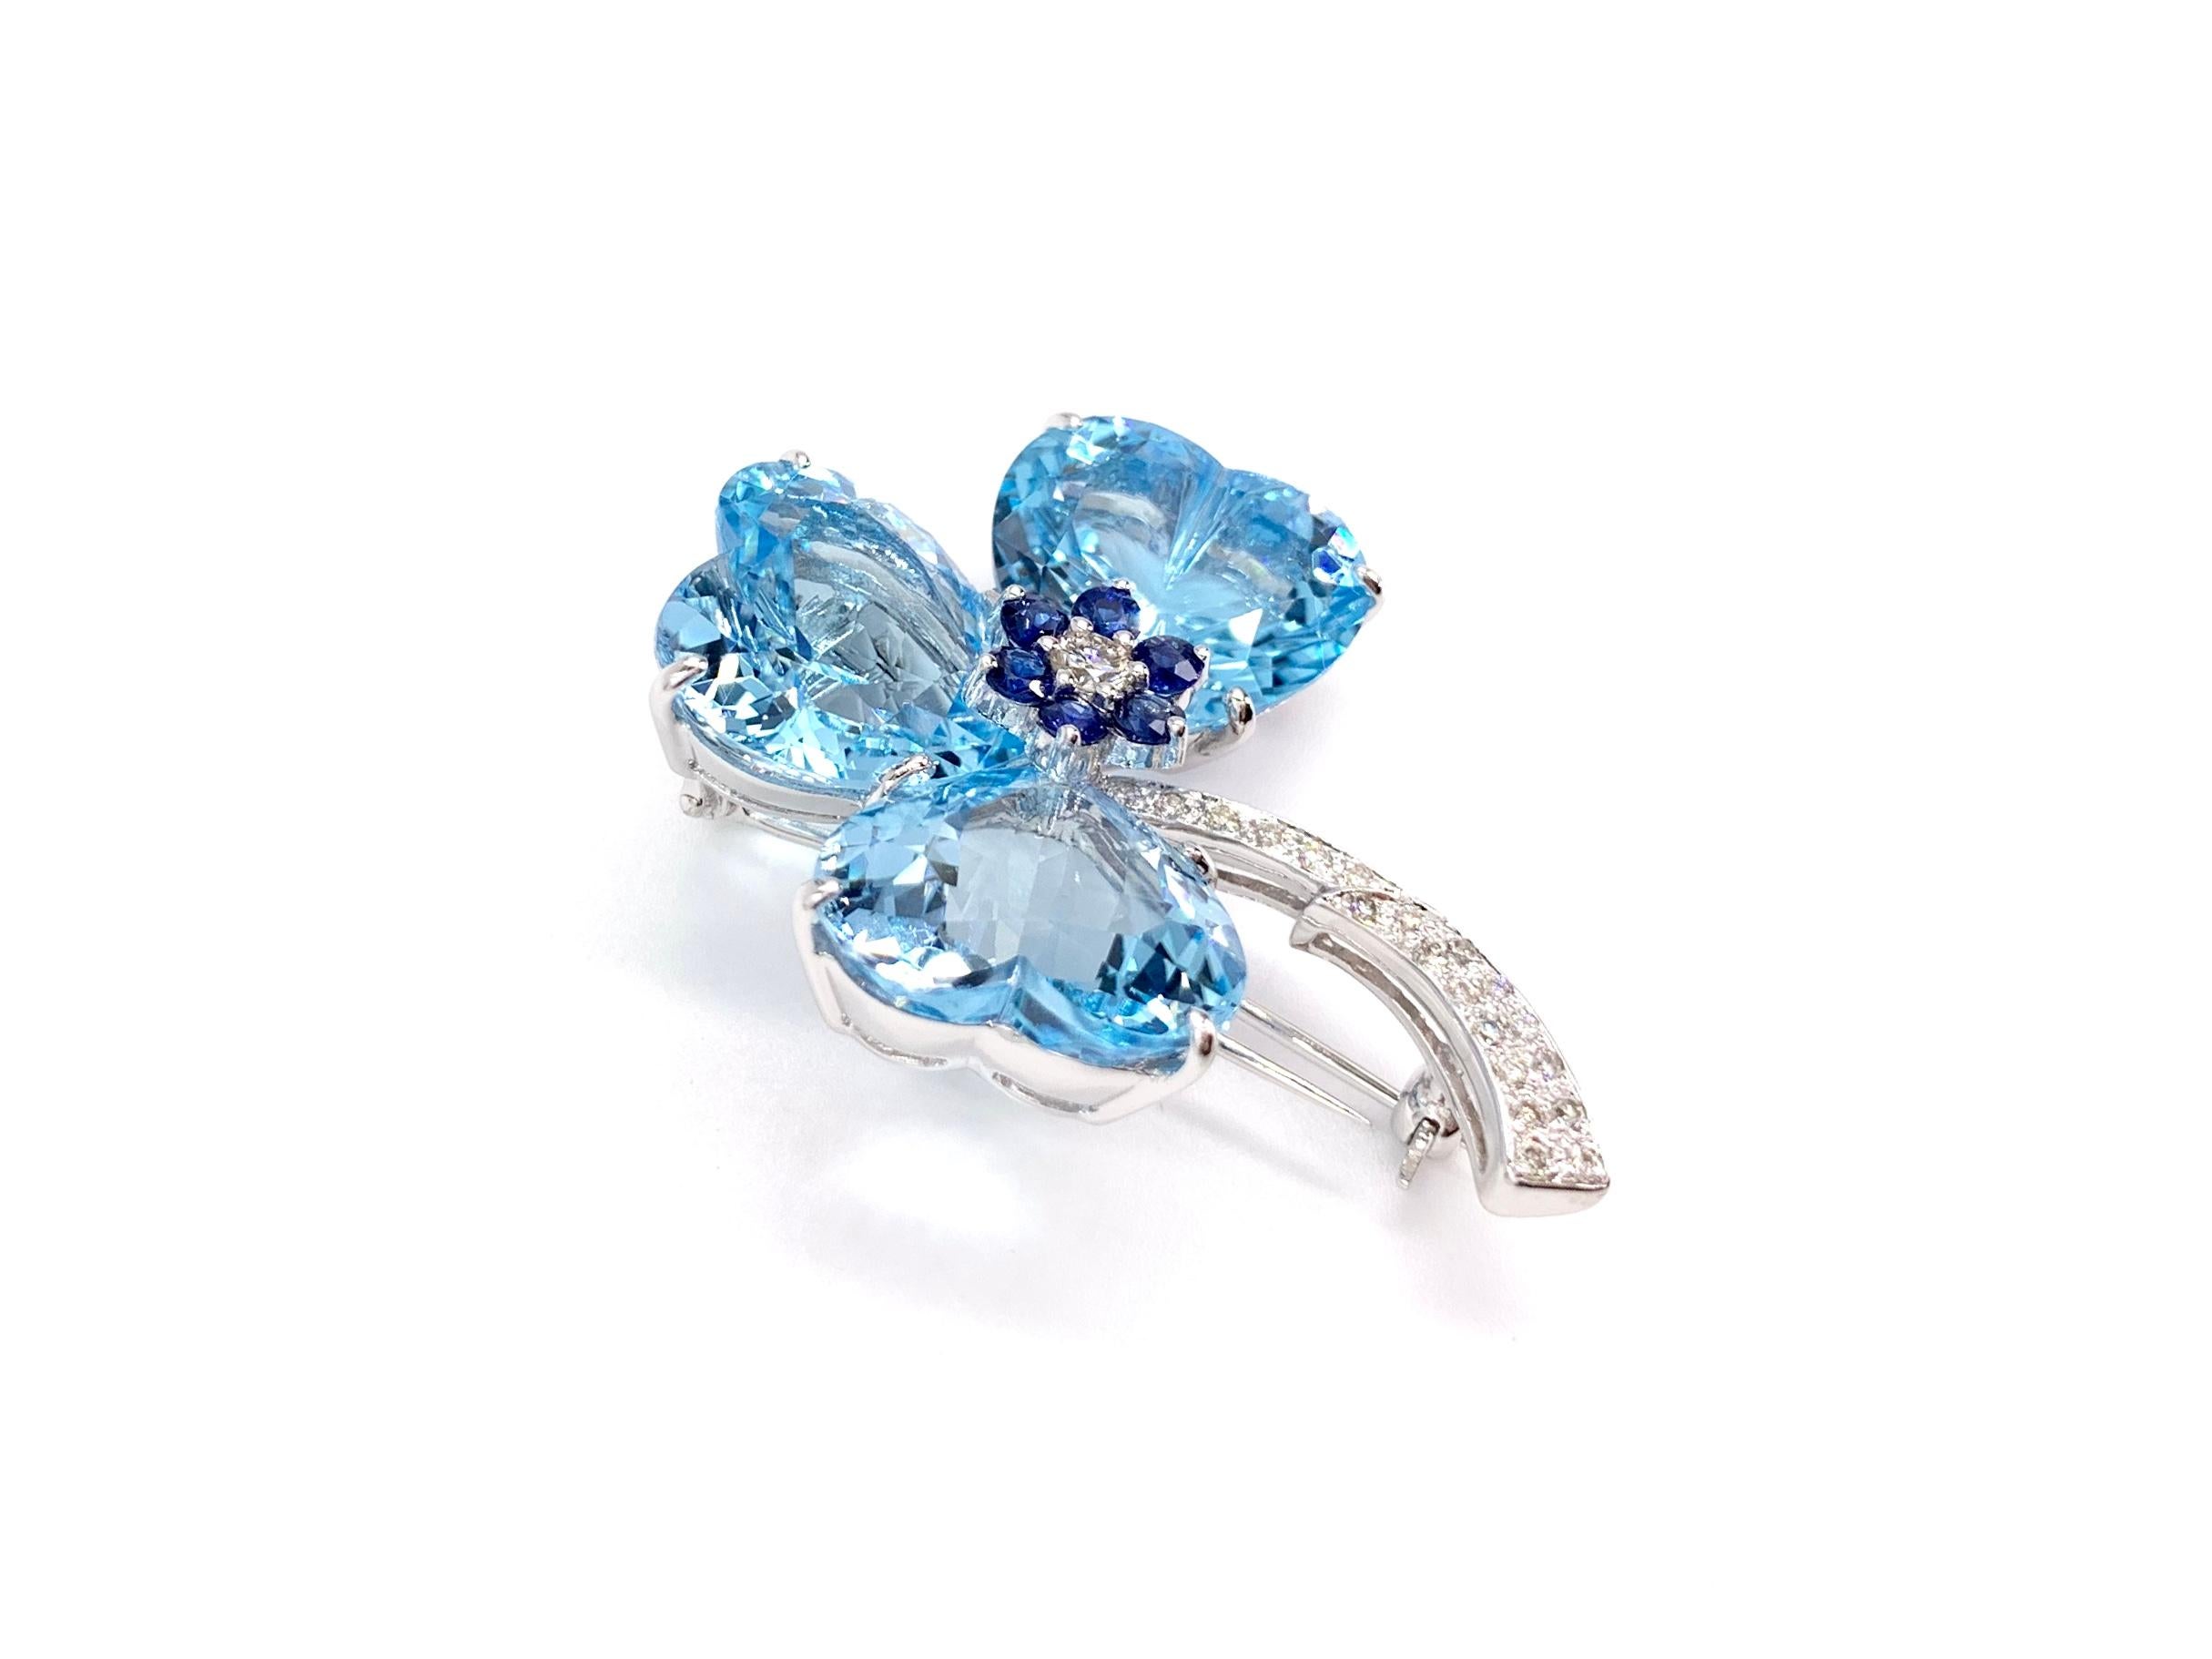 A truly stunning piece made with high quality gemstones. This 18 karat white gold clover pin features three heart shape blue topaz with a total weight of 37.34 carats, six blue sapphires at .44 carats total weight and twenty-one diamonds at .36